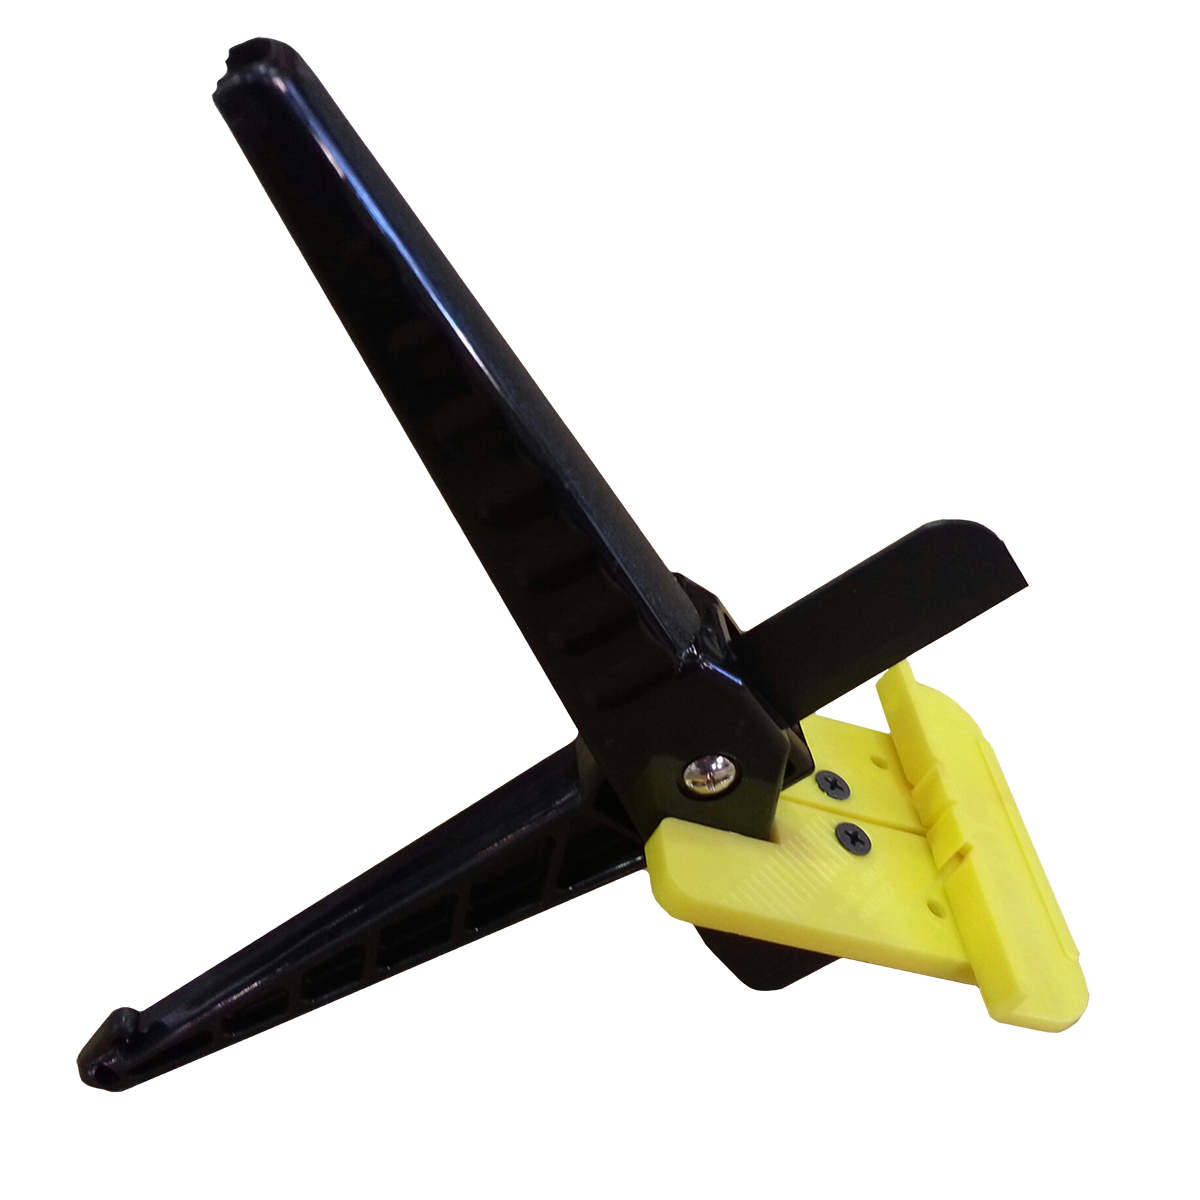 Sure-Cut Gland Packing Scissors for precise, accurate cutting of various pump and valve packing materials, types and sizes.